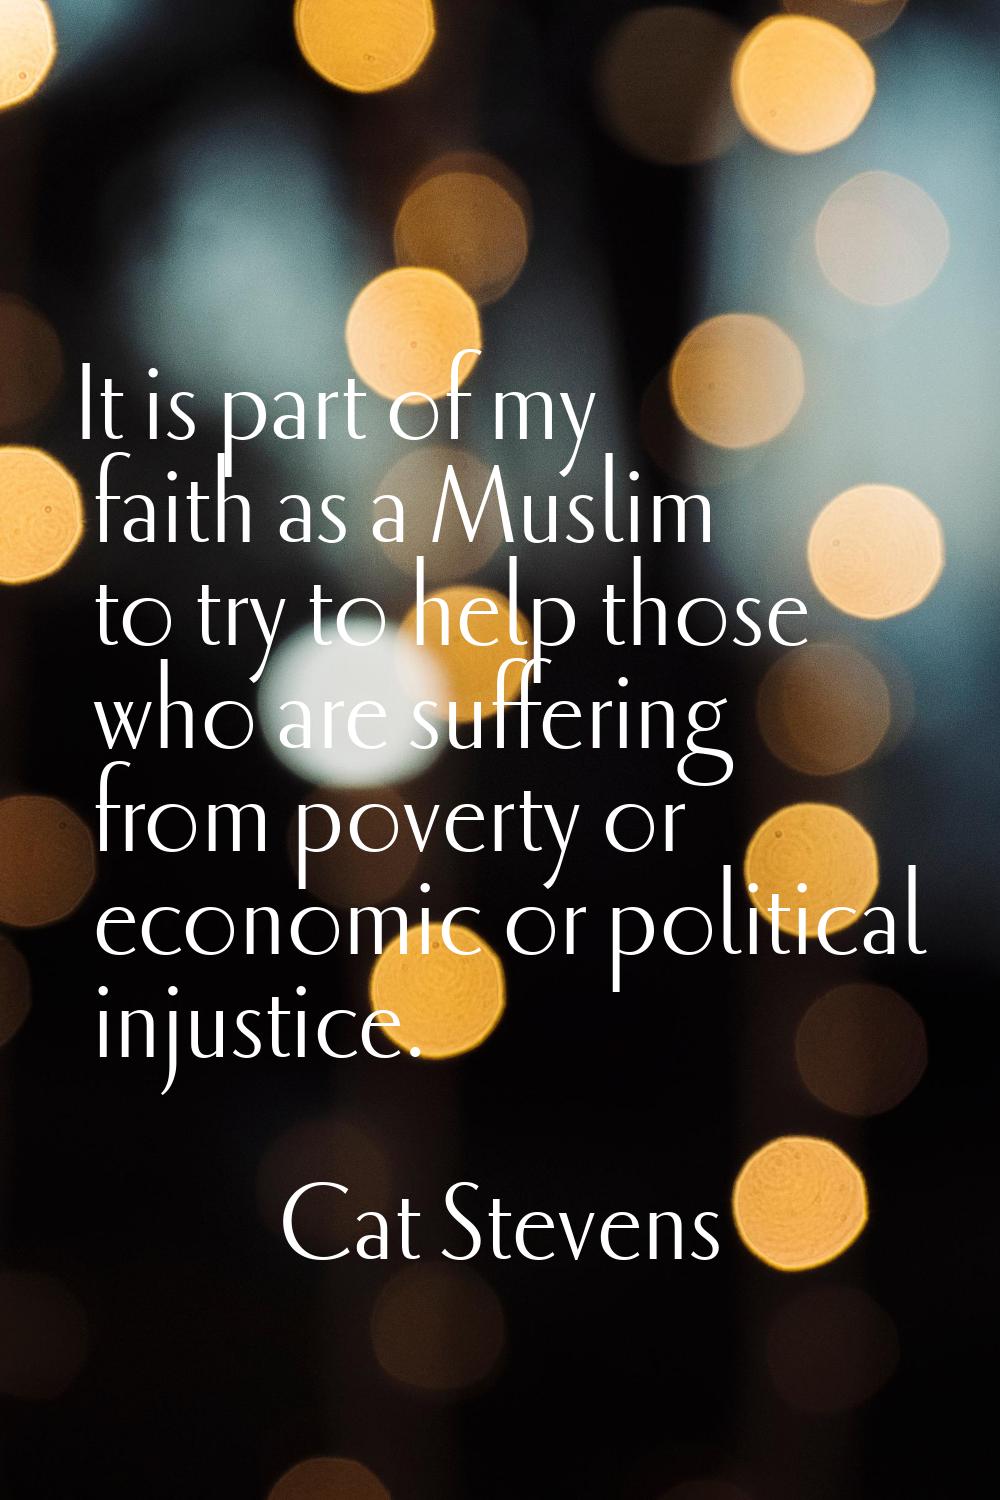 It is part of my faith as a Muslim to try to help those who are suffering from poverty or economic 